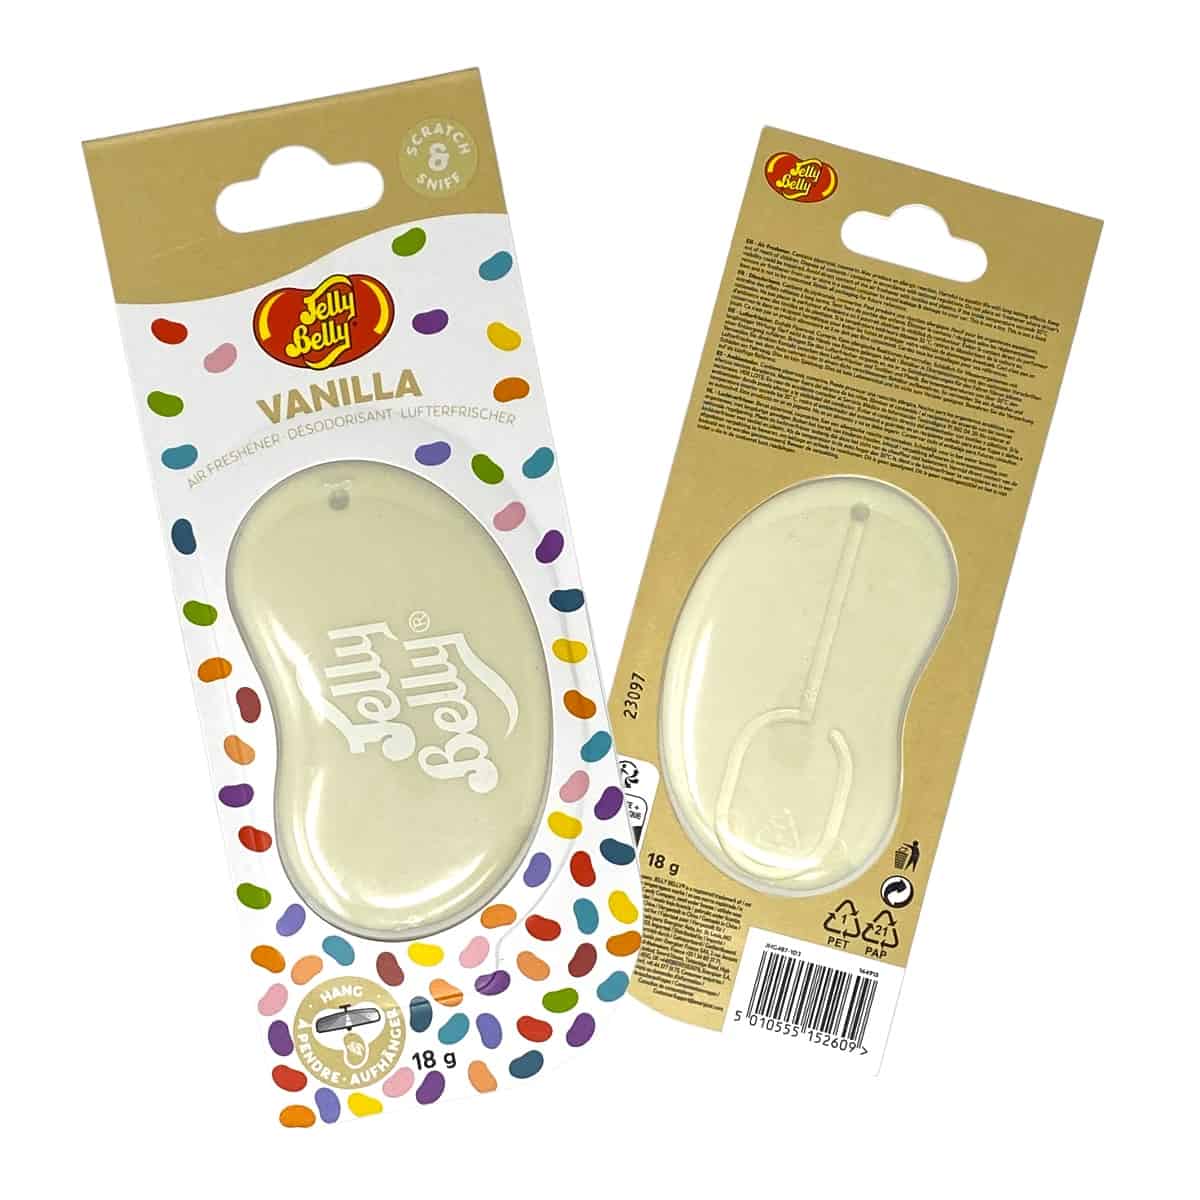 Whether you're looking to enhance the ambiance of your car, home, or office, the Jelly Belly 3D Vanilla Air Freshener is the ideal choice. Its hanging gel design ensures convenient placement wherever you desire, without taking up valuable space.